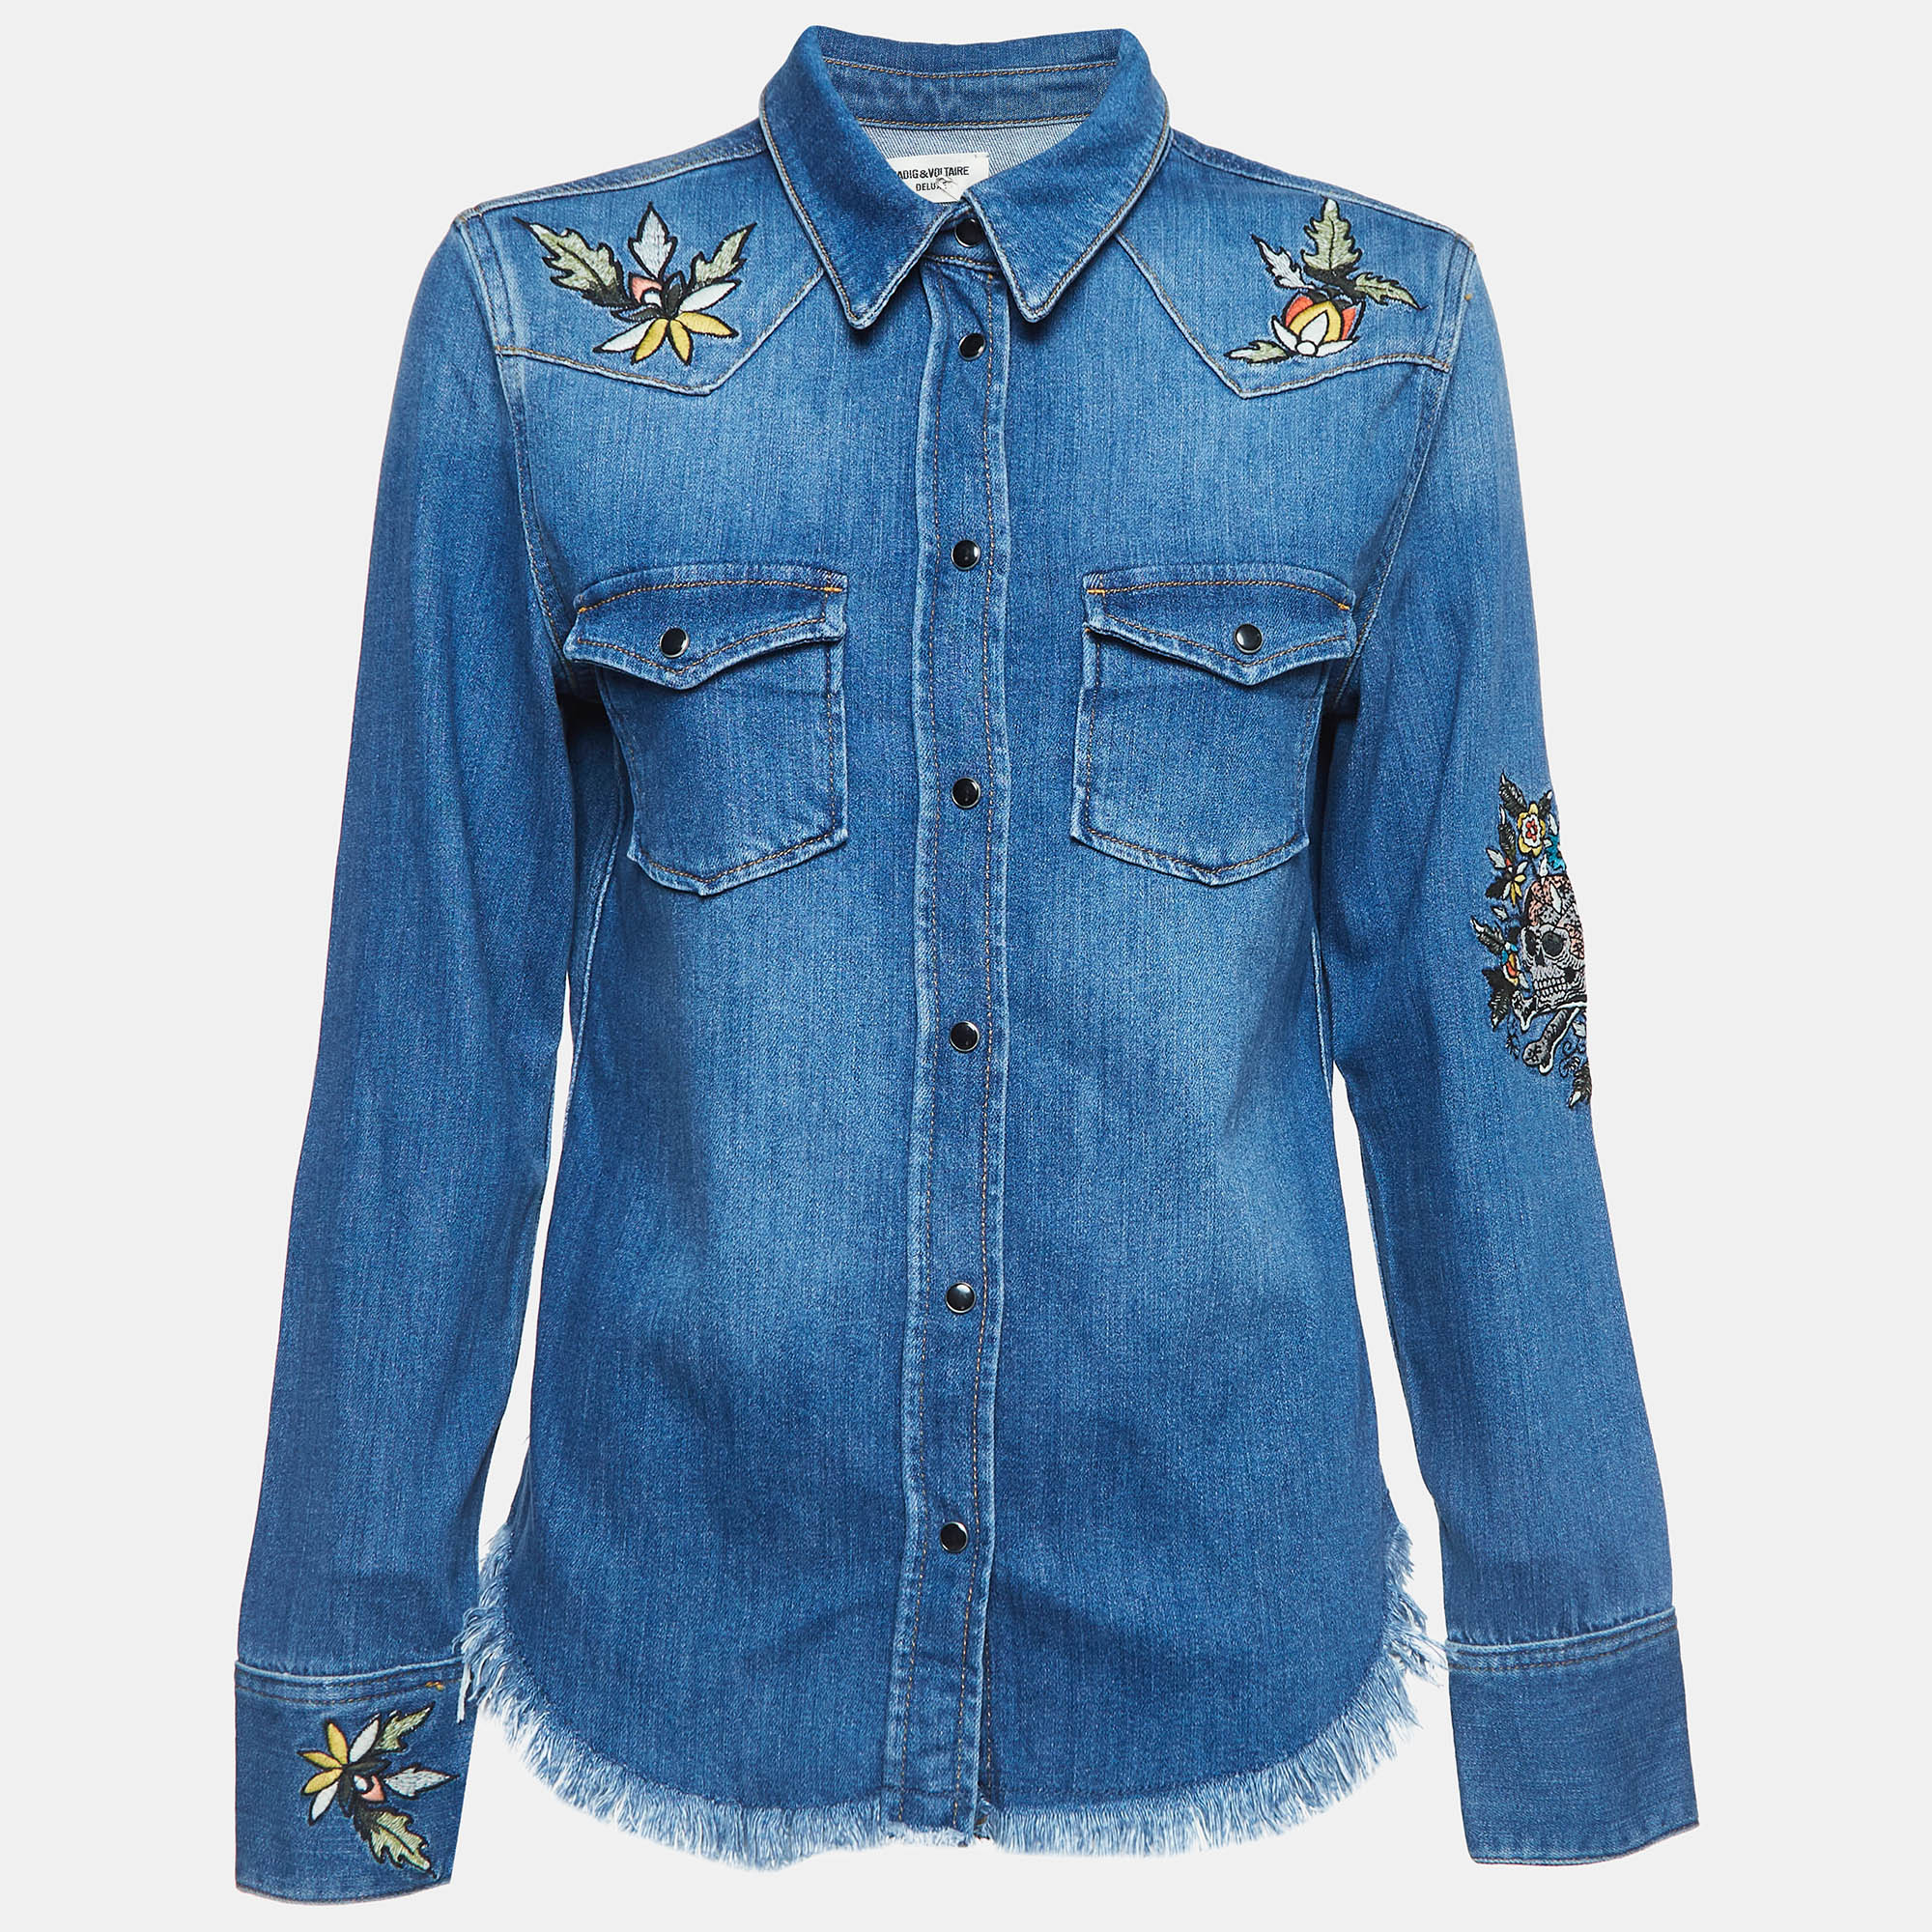 Zadig & voltaire deluxe blue embroidered love now denim shirt s